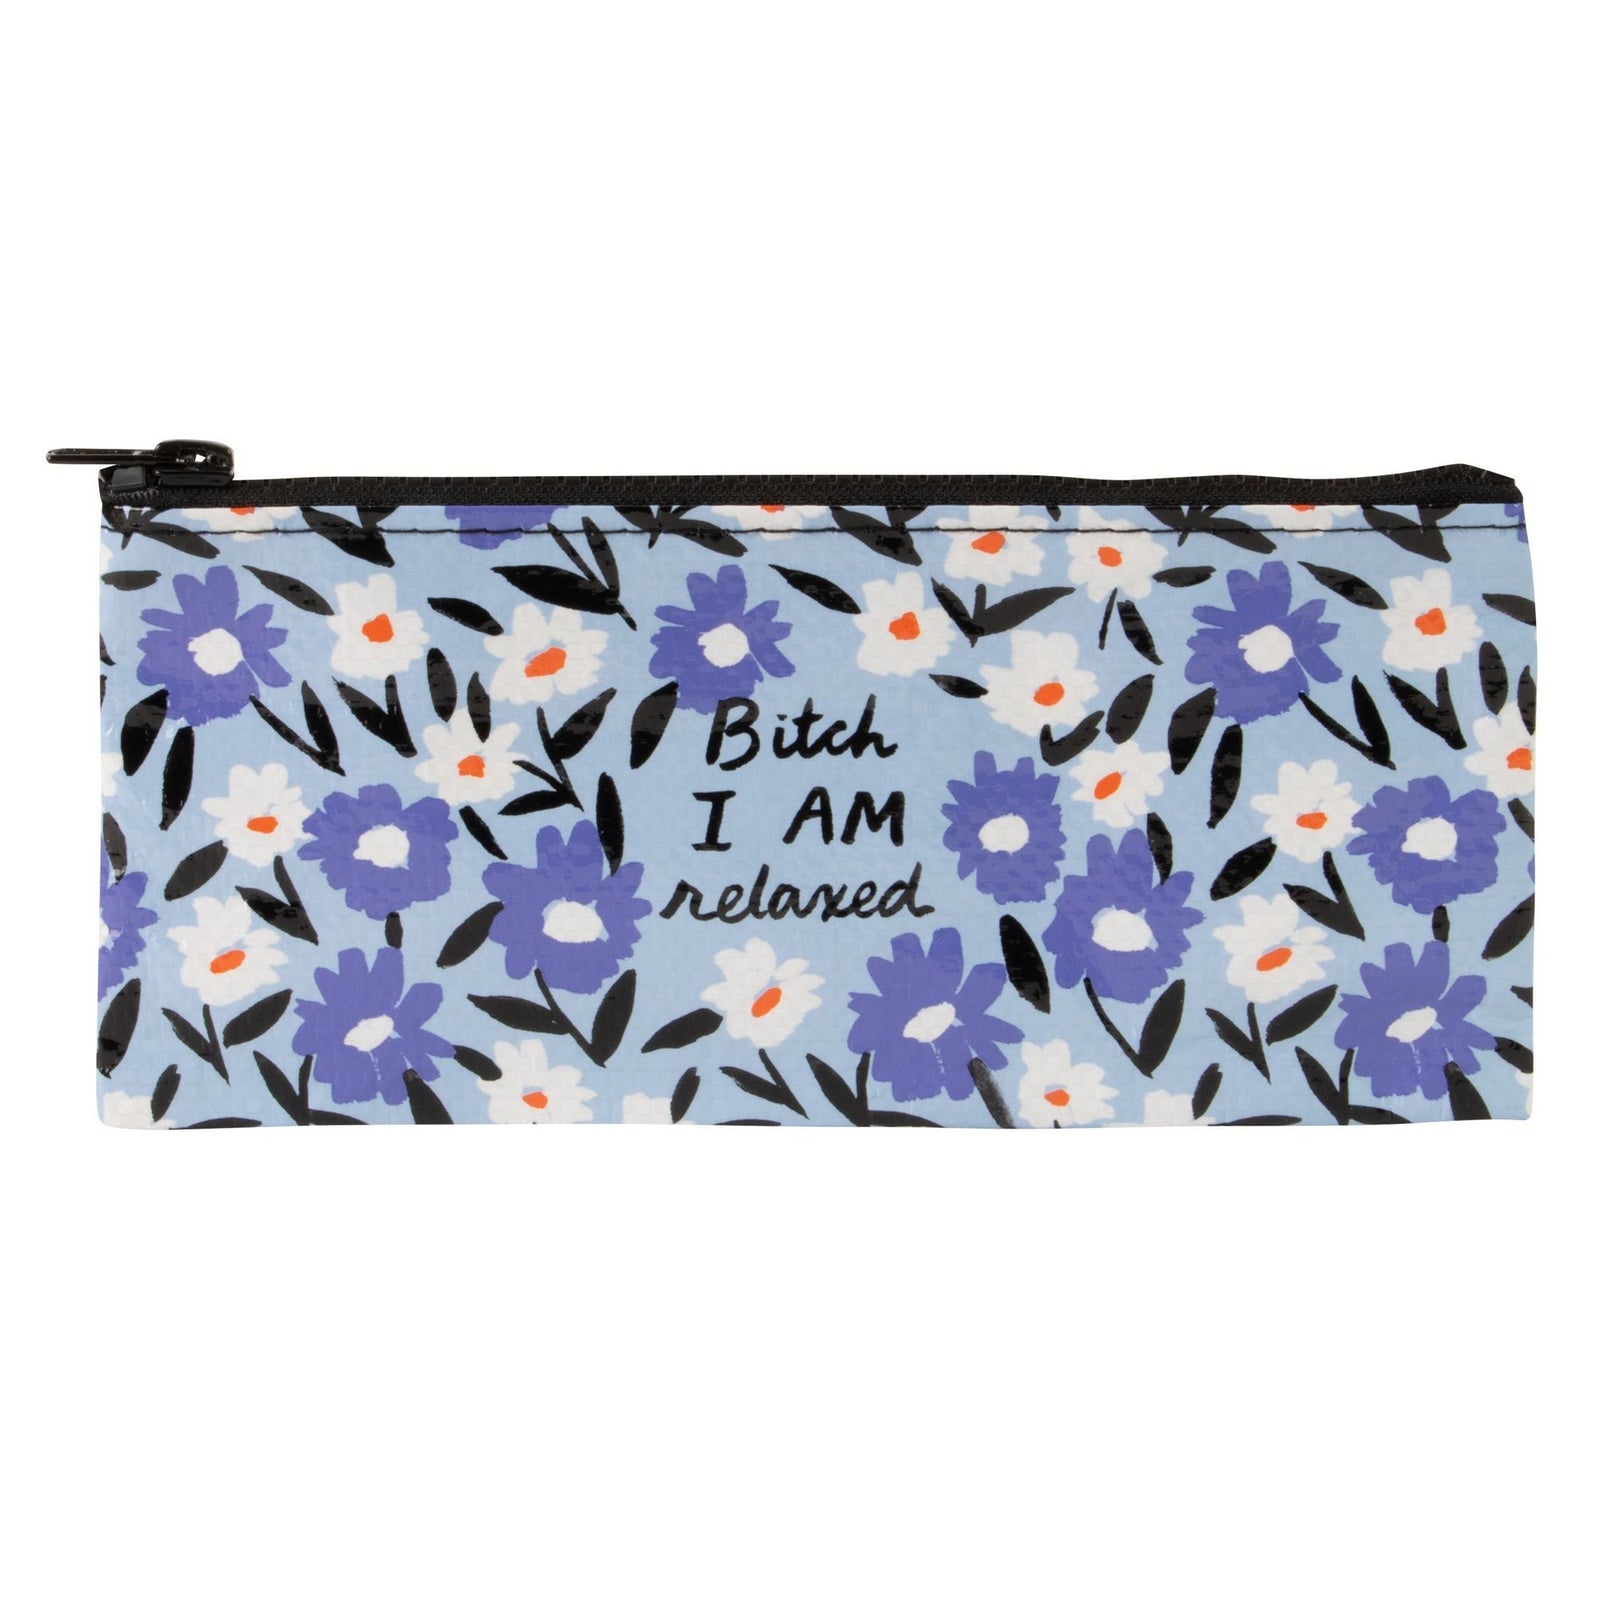 Last Call! Bitch I Am Relaxed Recycled Material Cute/Cool/Best Zipper Pencil Case/Pouch/Holder/Pen Bag/Holder